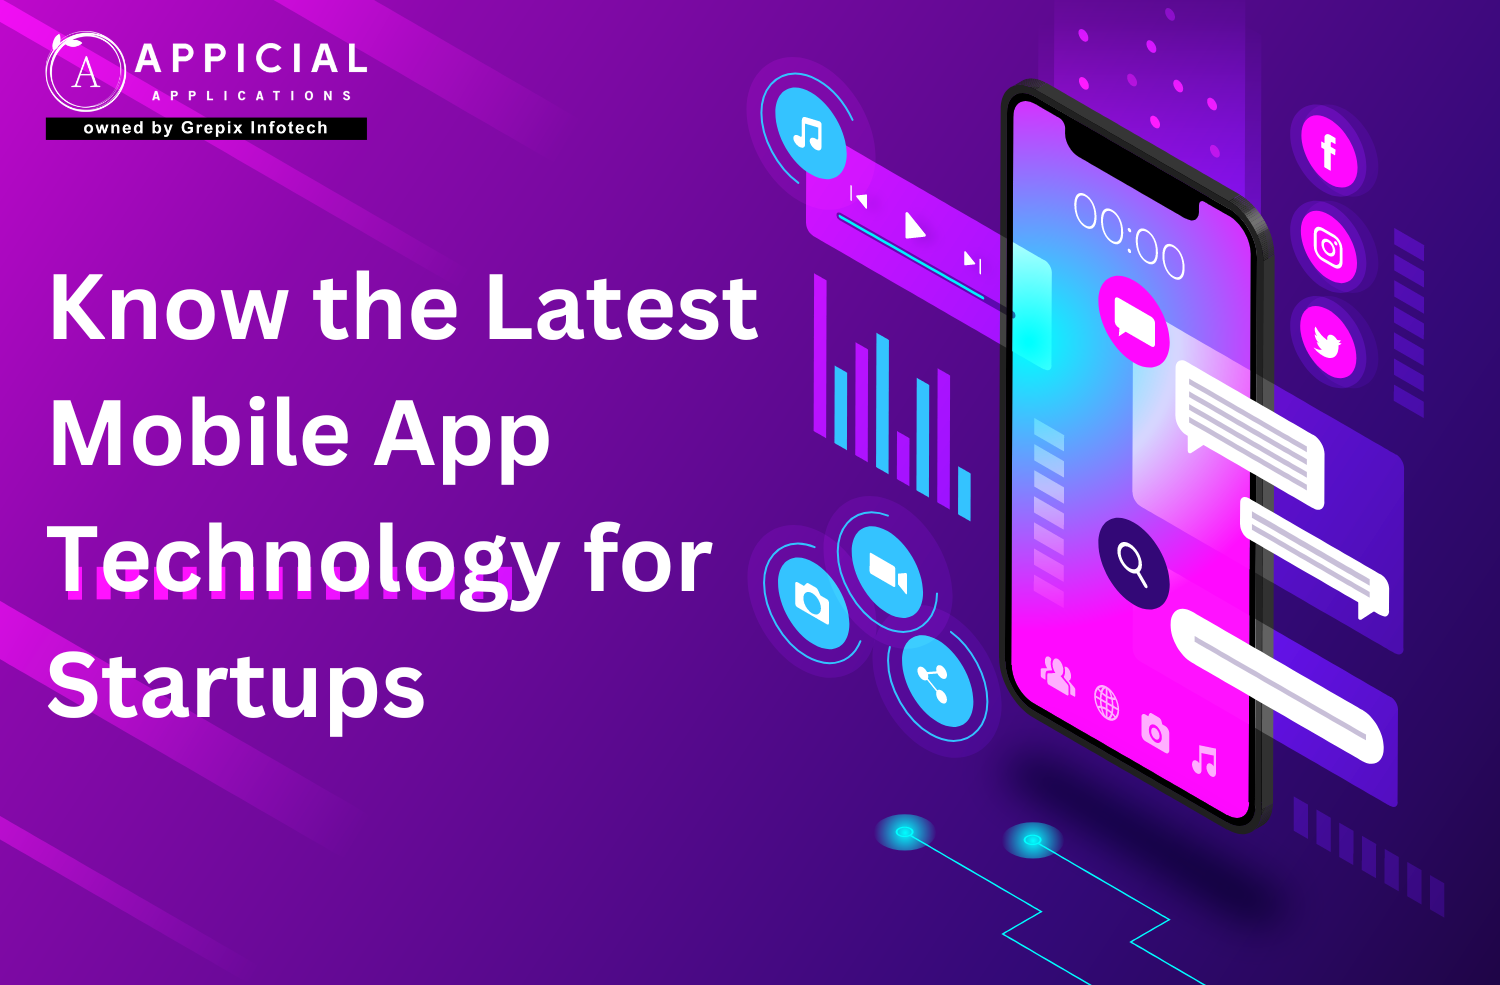 Know the Latest Mobile App Technology for Startups